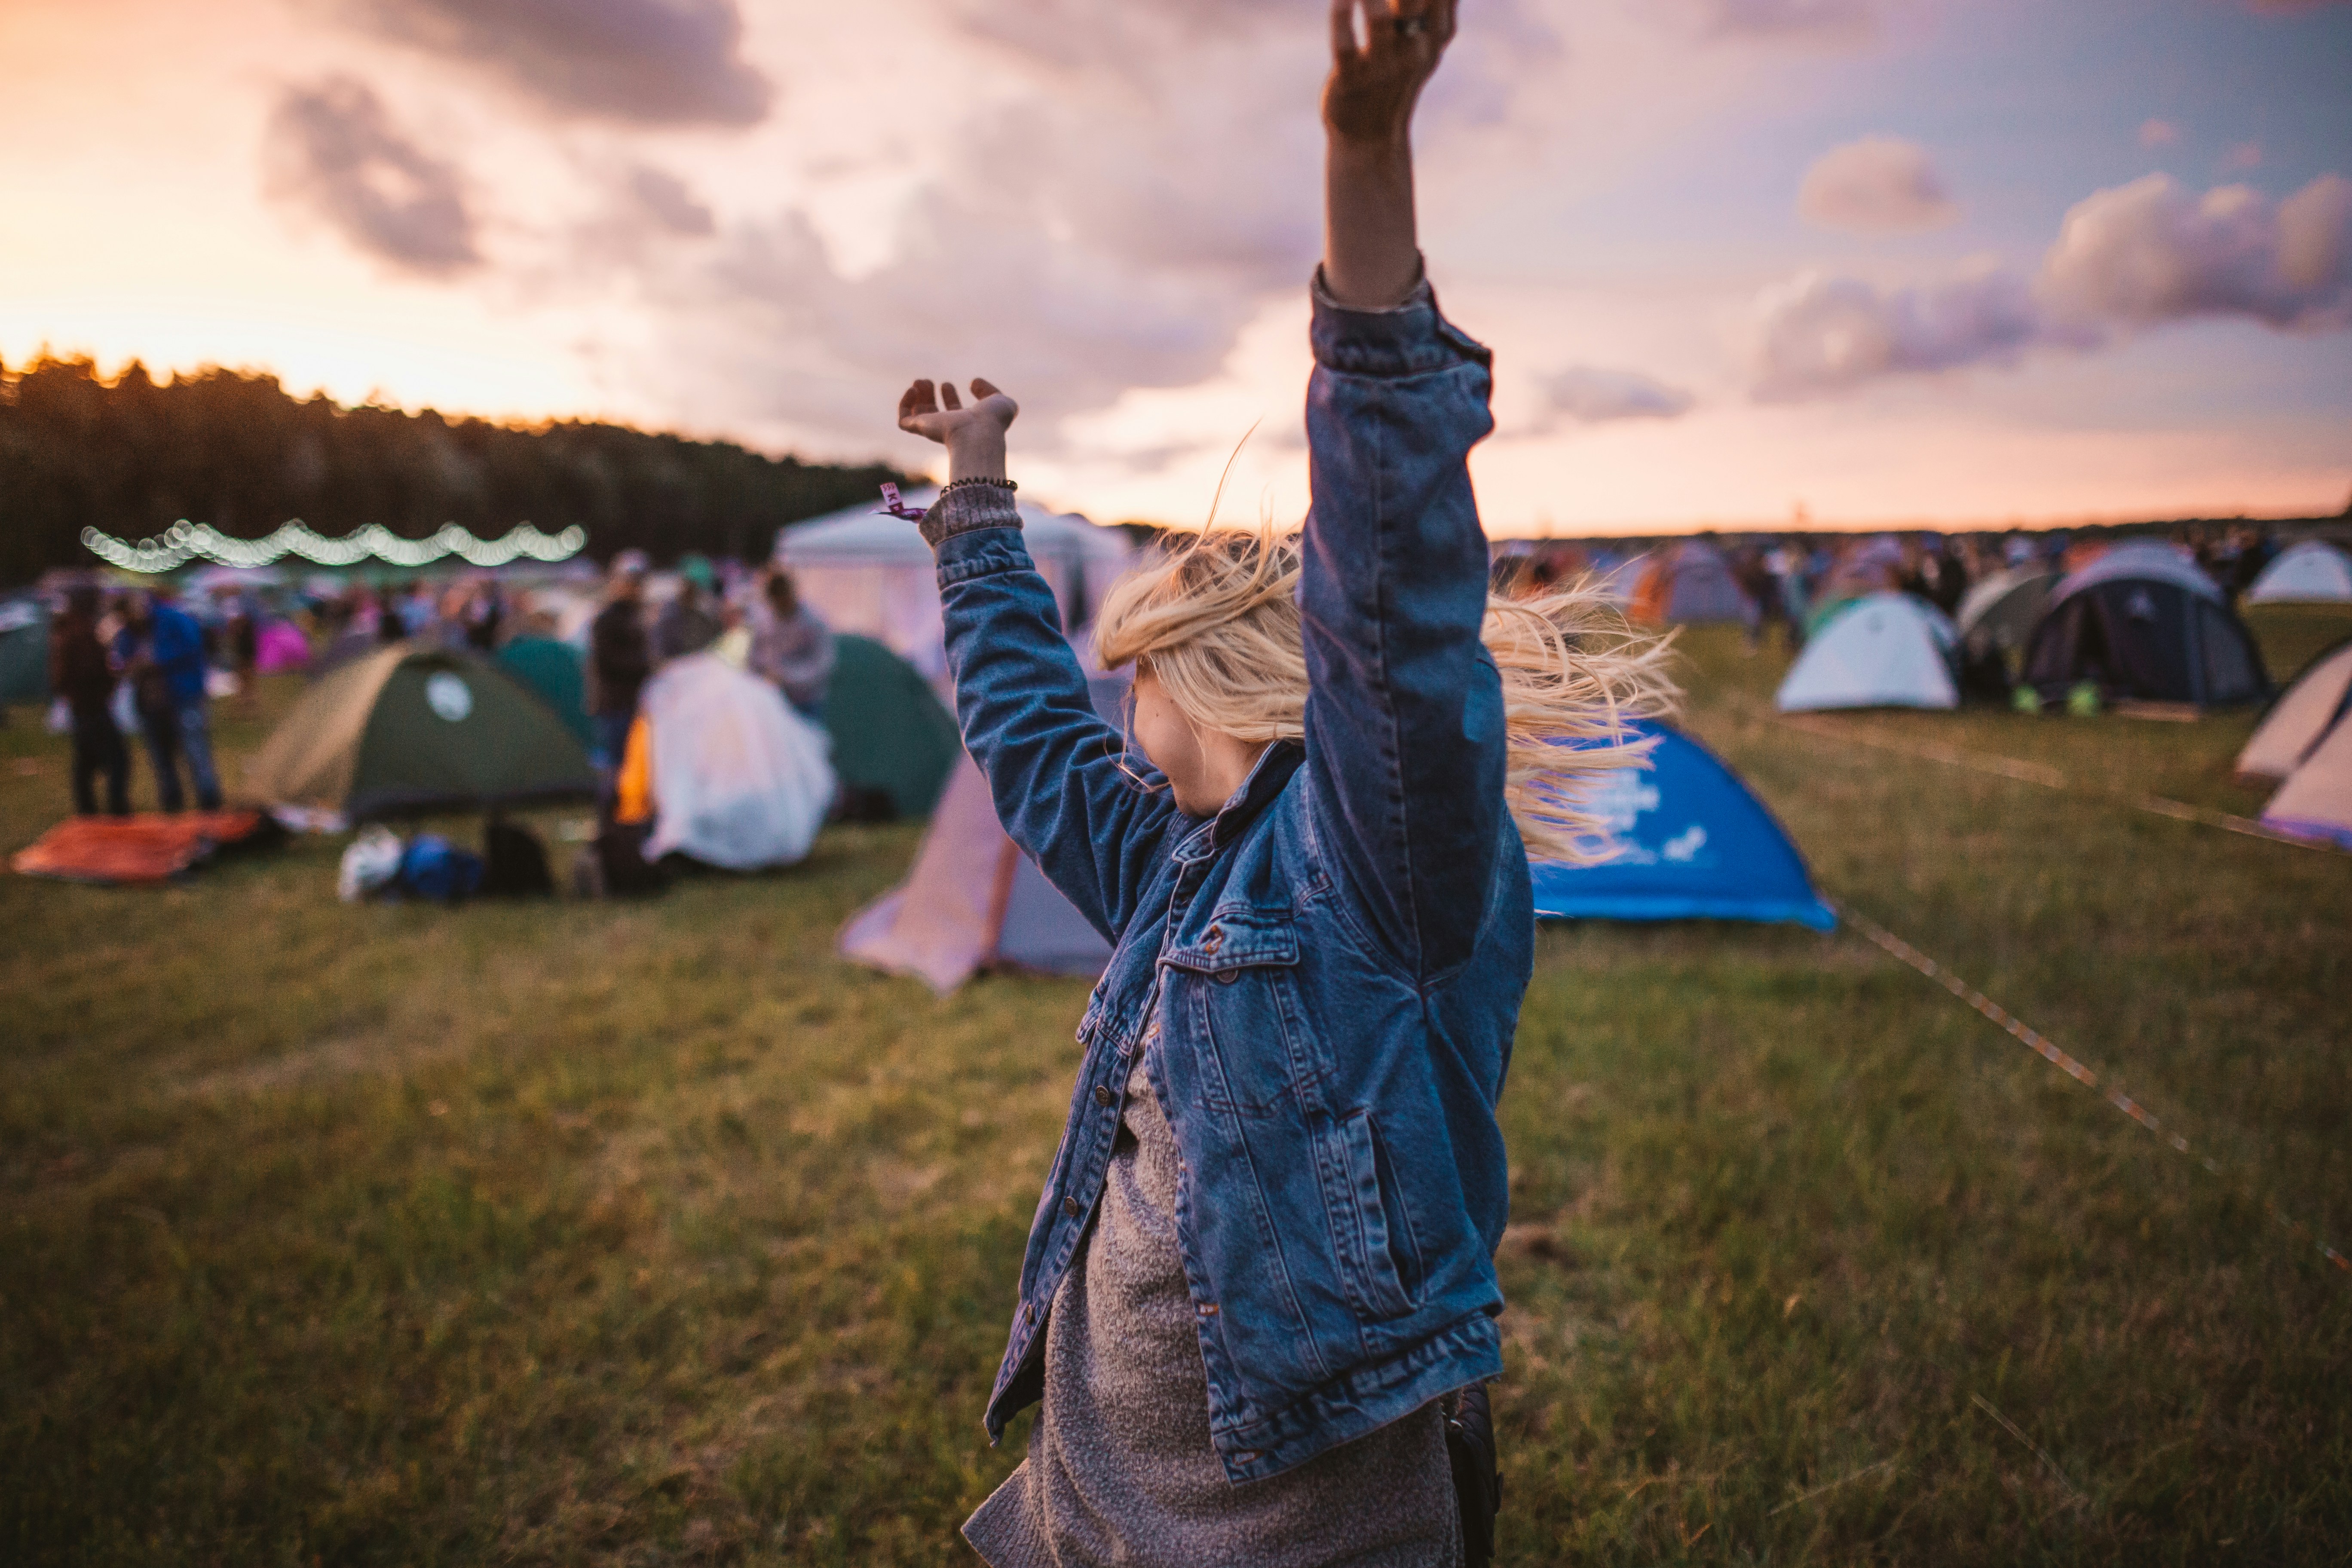 A person with blonde hair wearing a denim jacket dances with their arms raised in a grassy field, surrounded by tents. The sun is setting and the sky is filled with clouds, creating a warm, vibrant atmosphere.